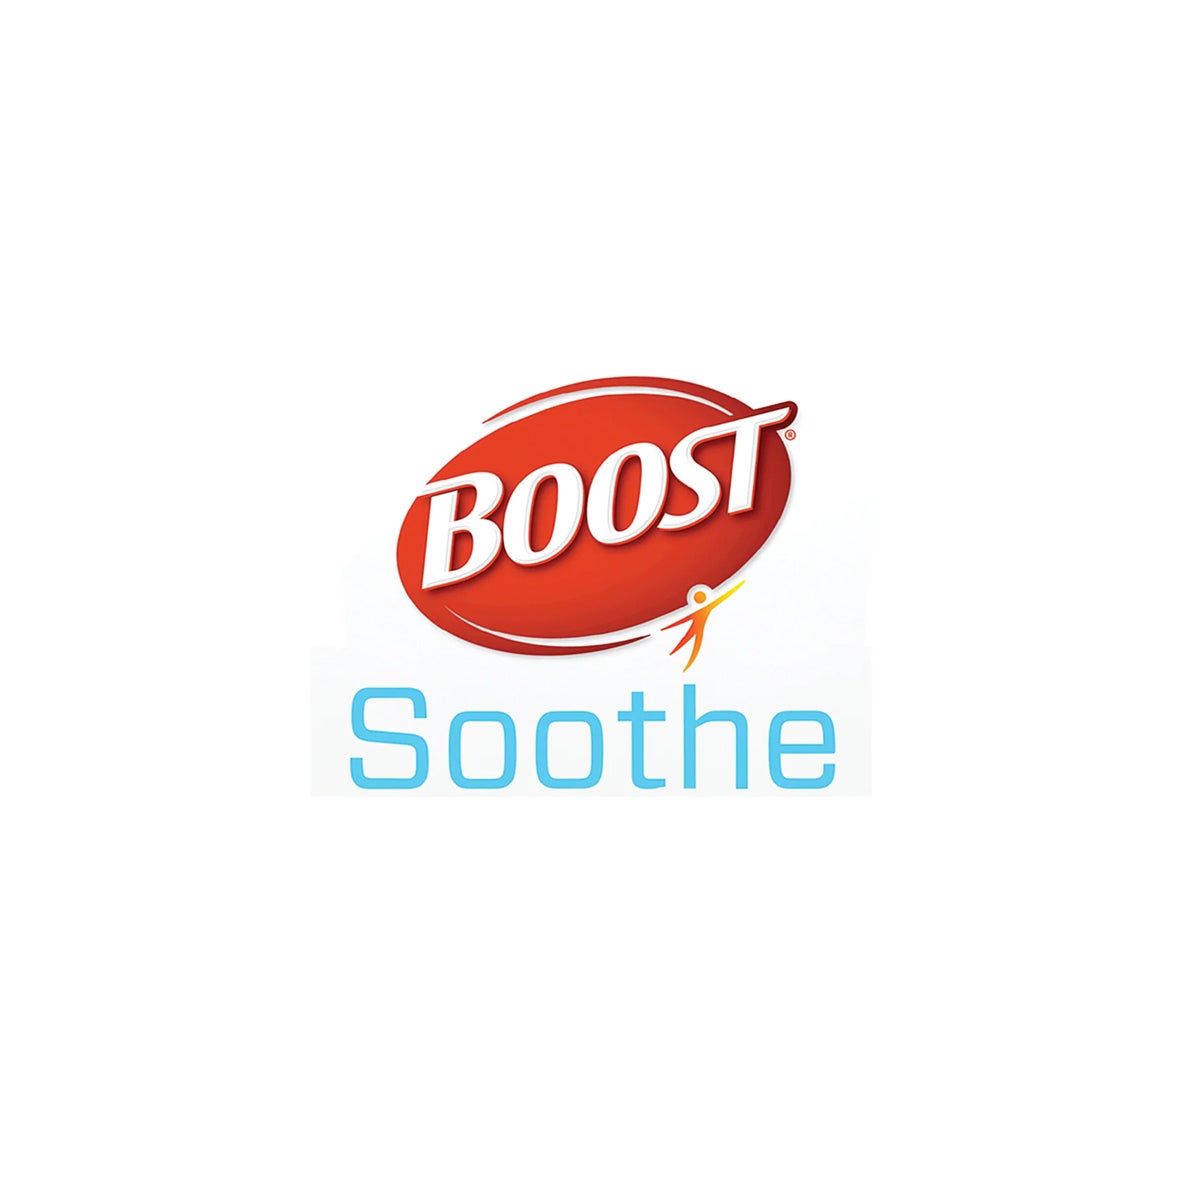 Boost Soothe® logo